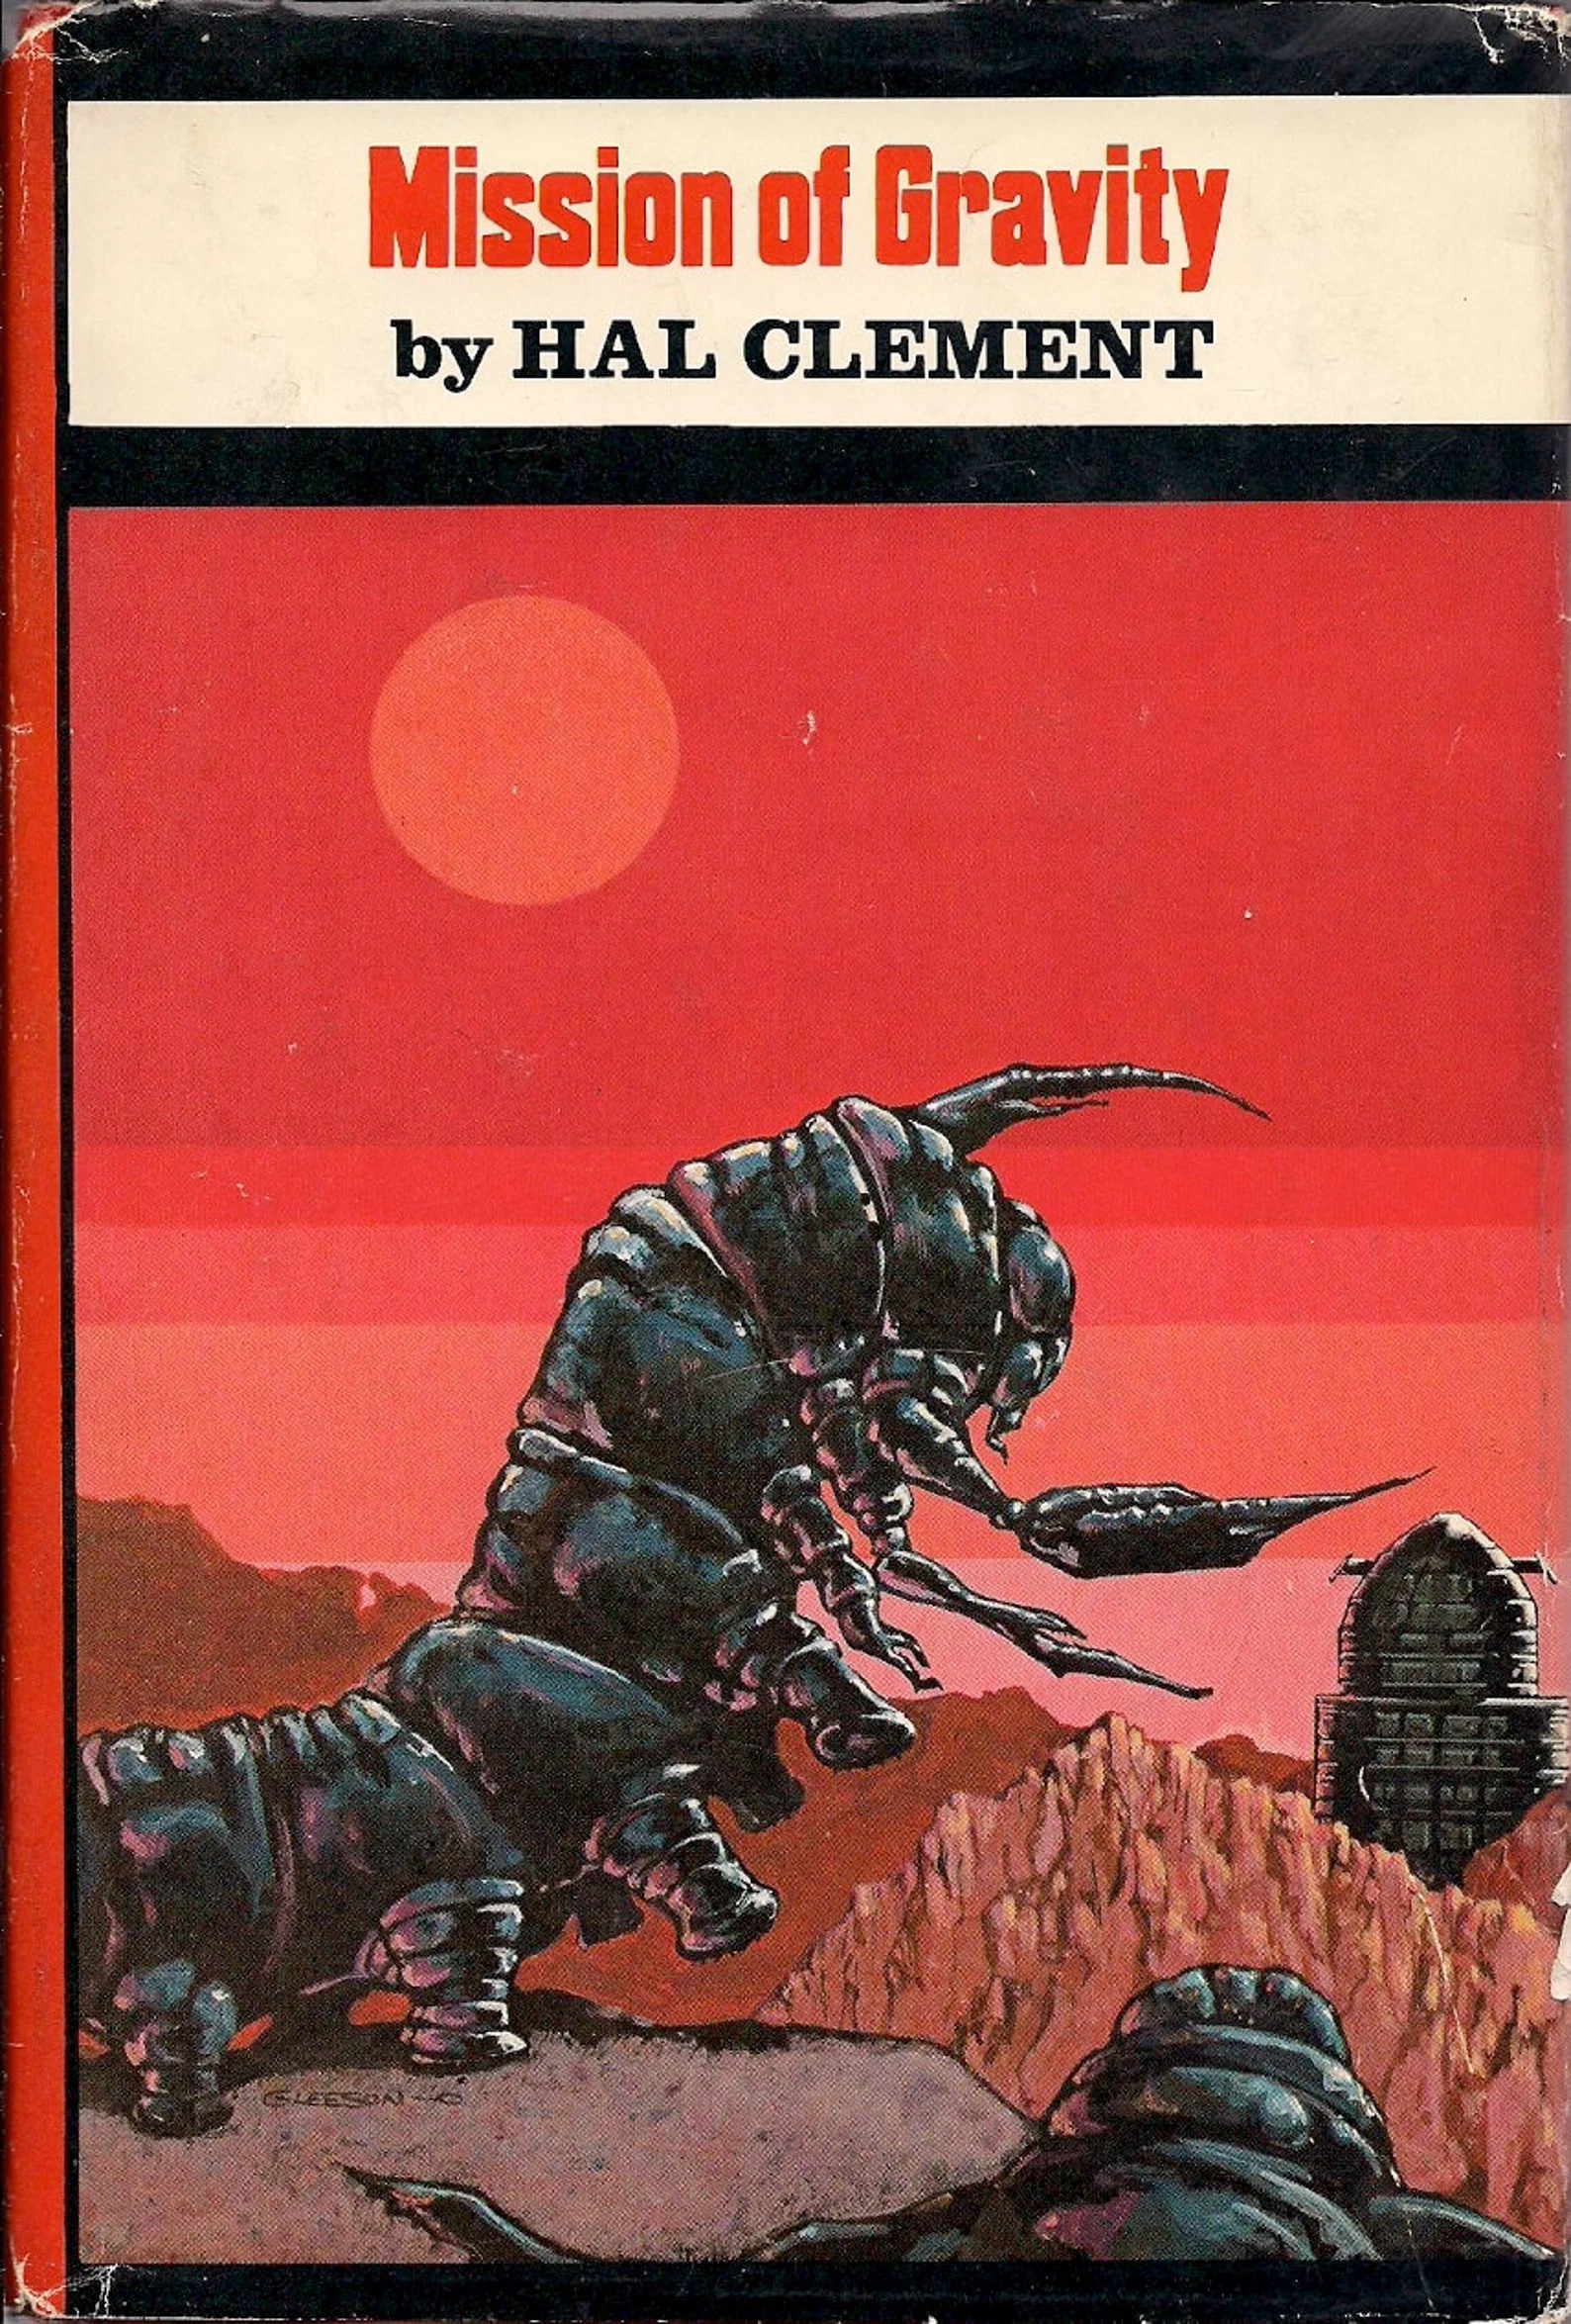 Book cover of Mission of Gravity.